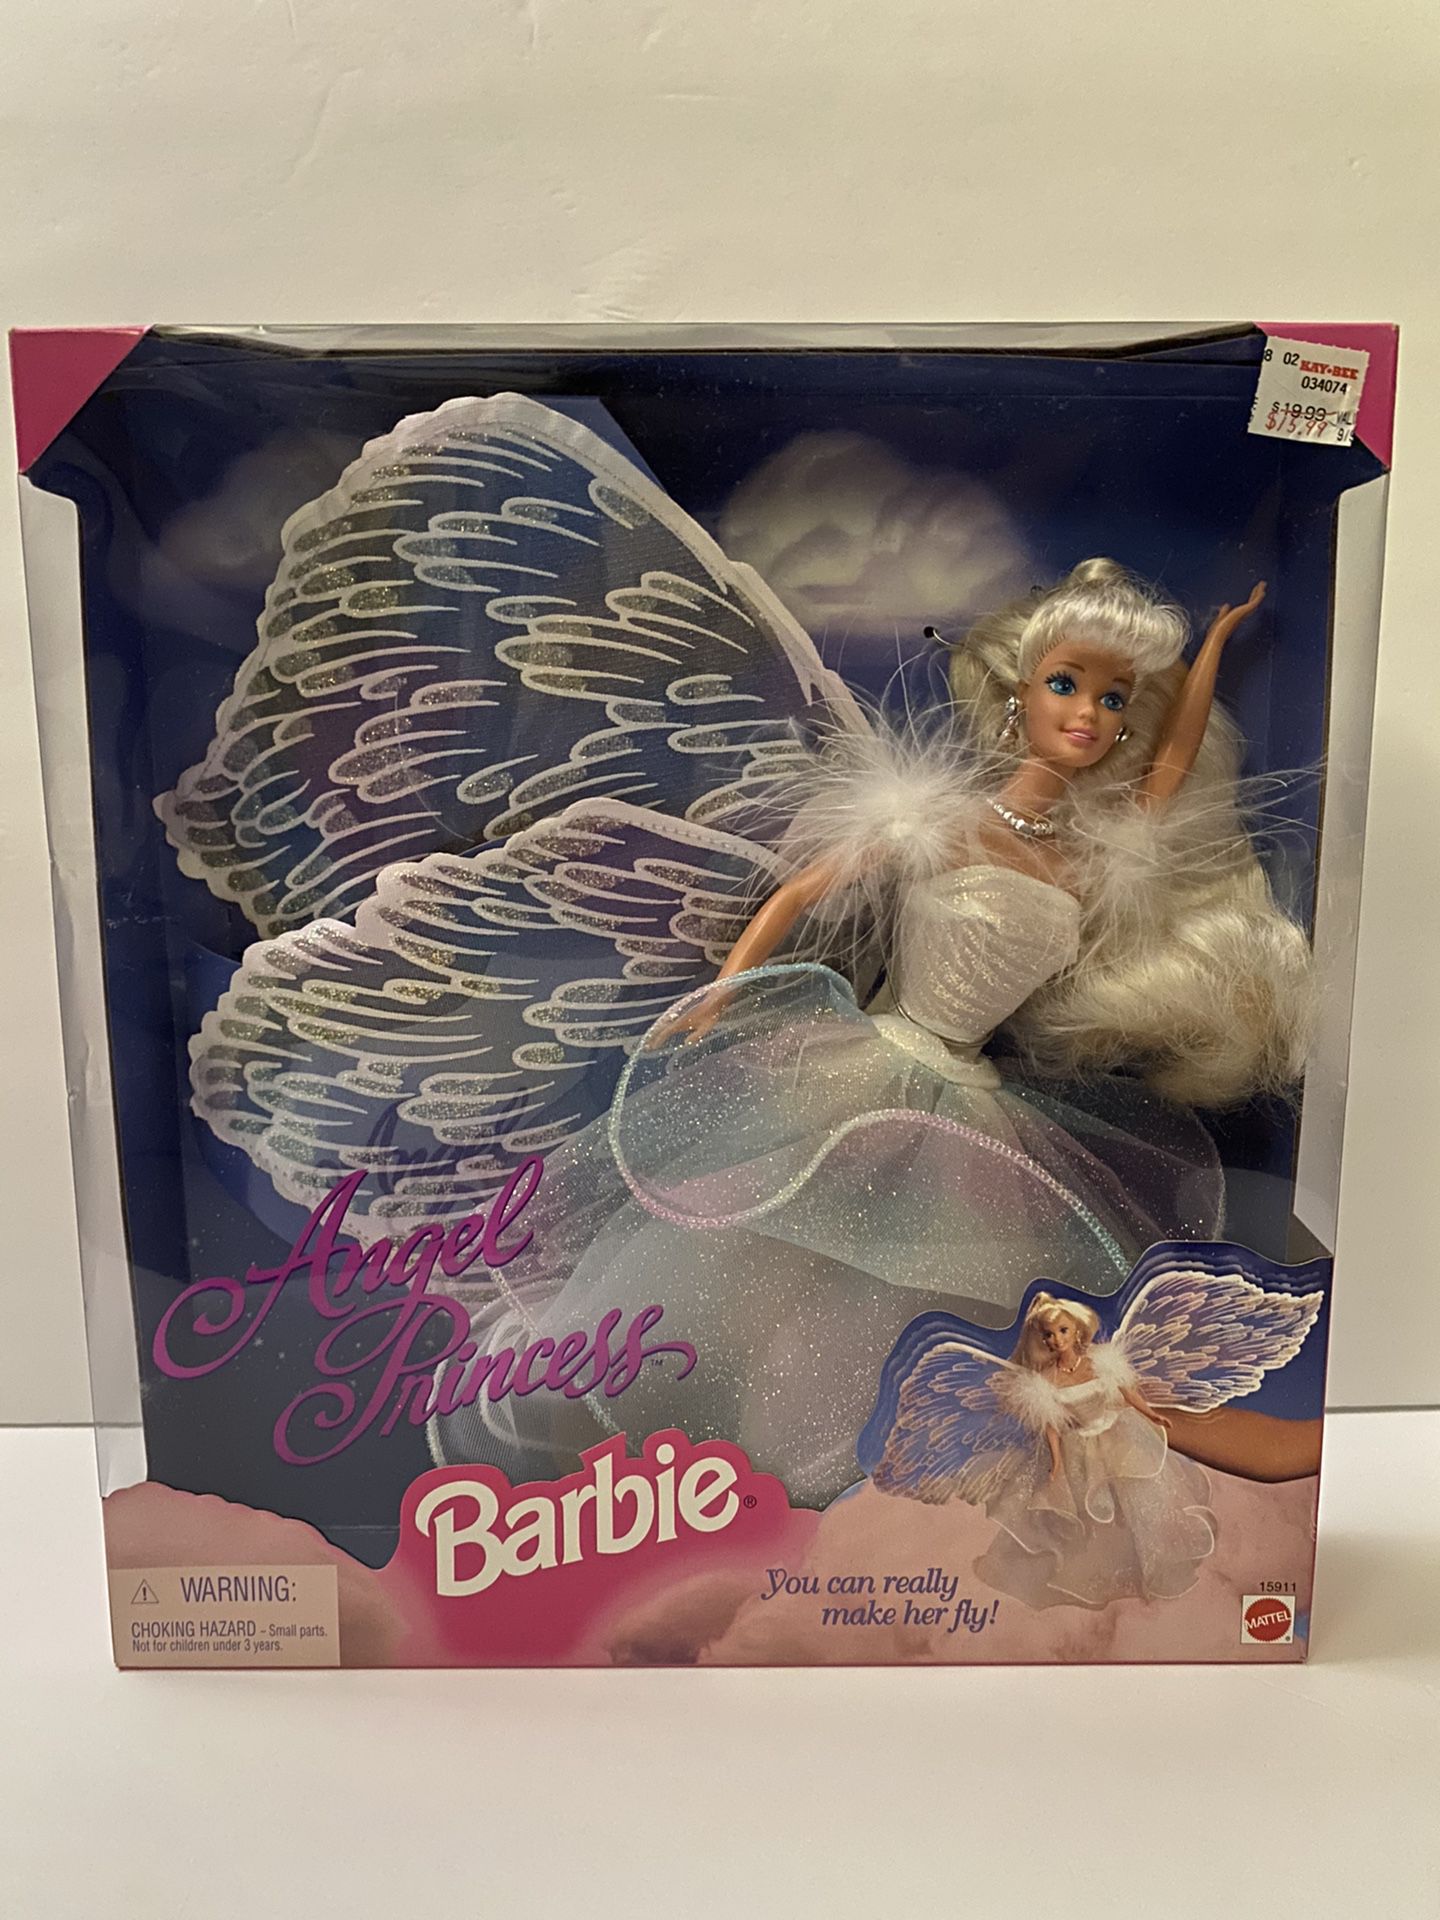 NEW 1996 Angel Princess Barbie Doll Mattel #15911 Blonde You Can Make Her Fly!!